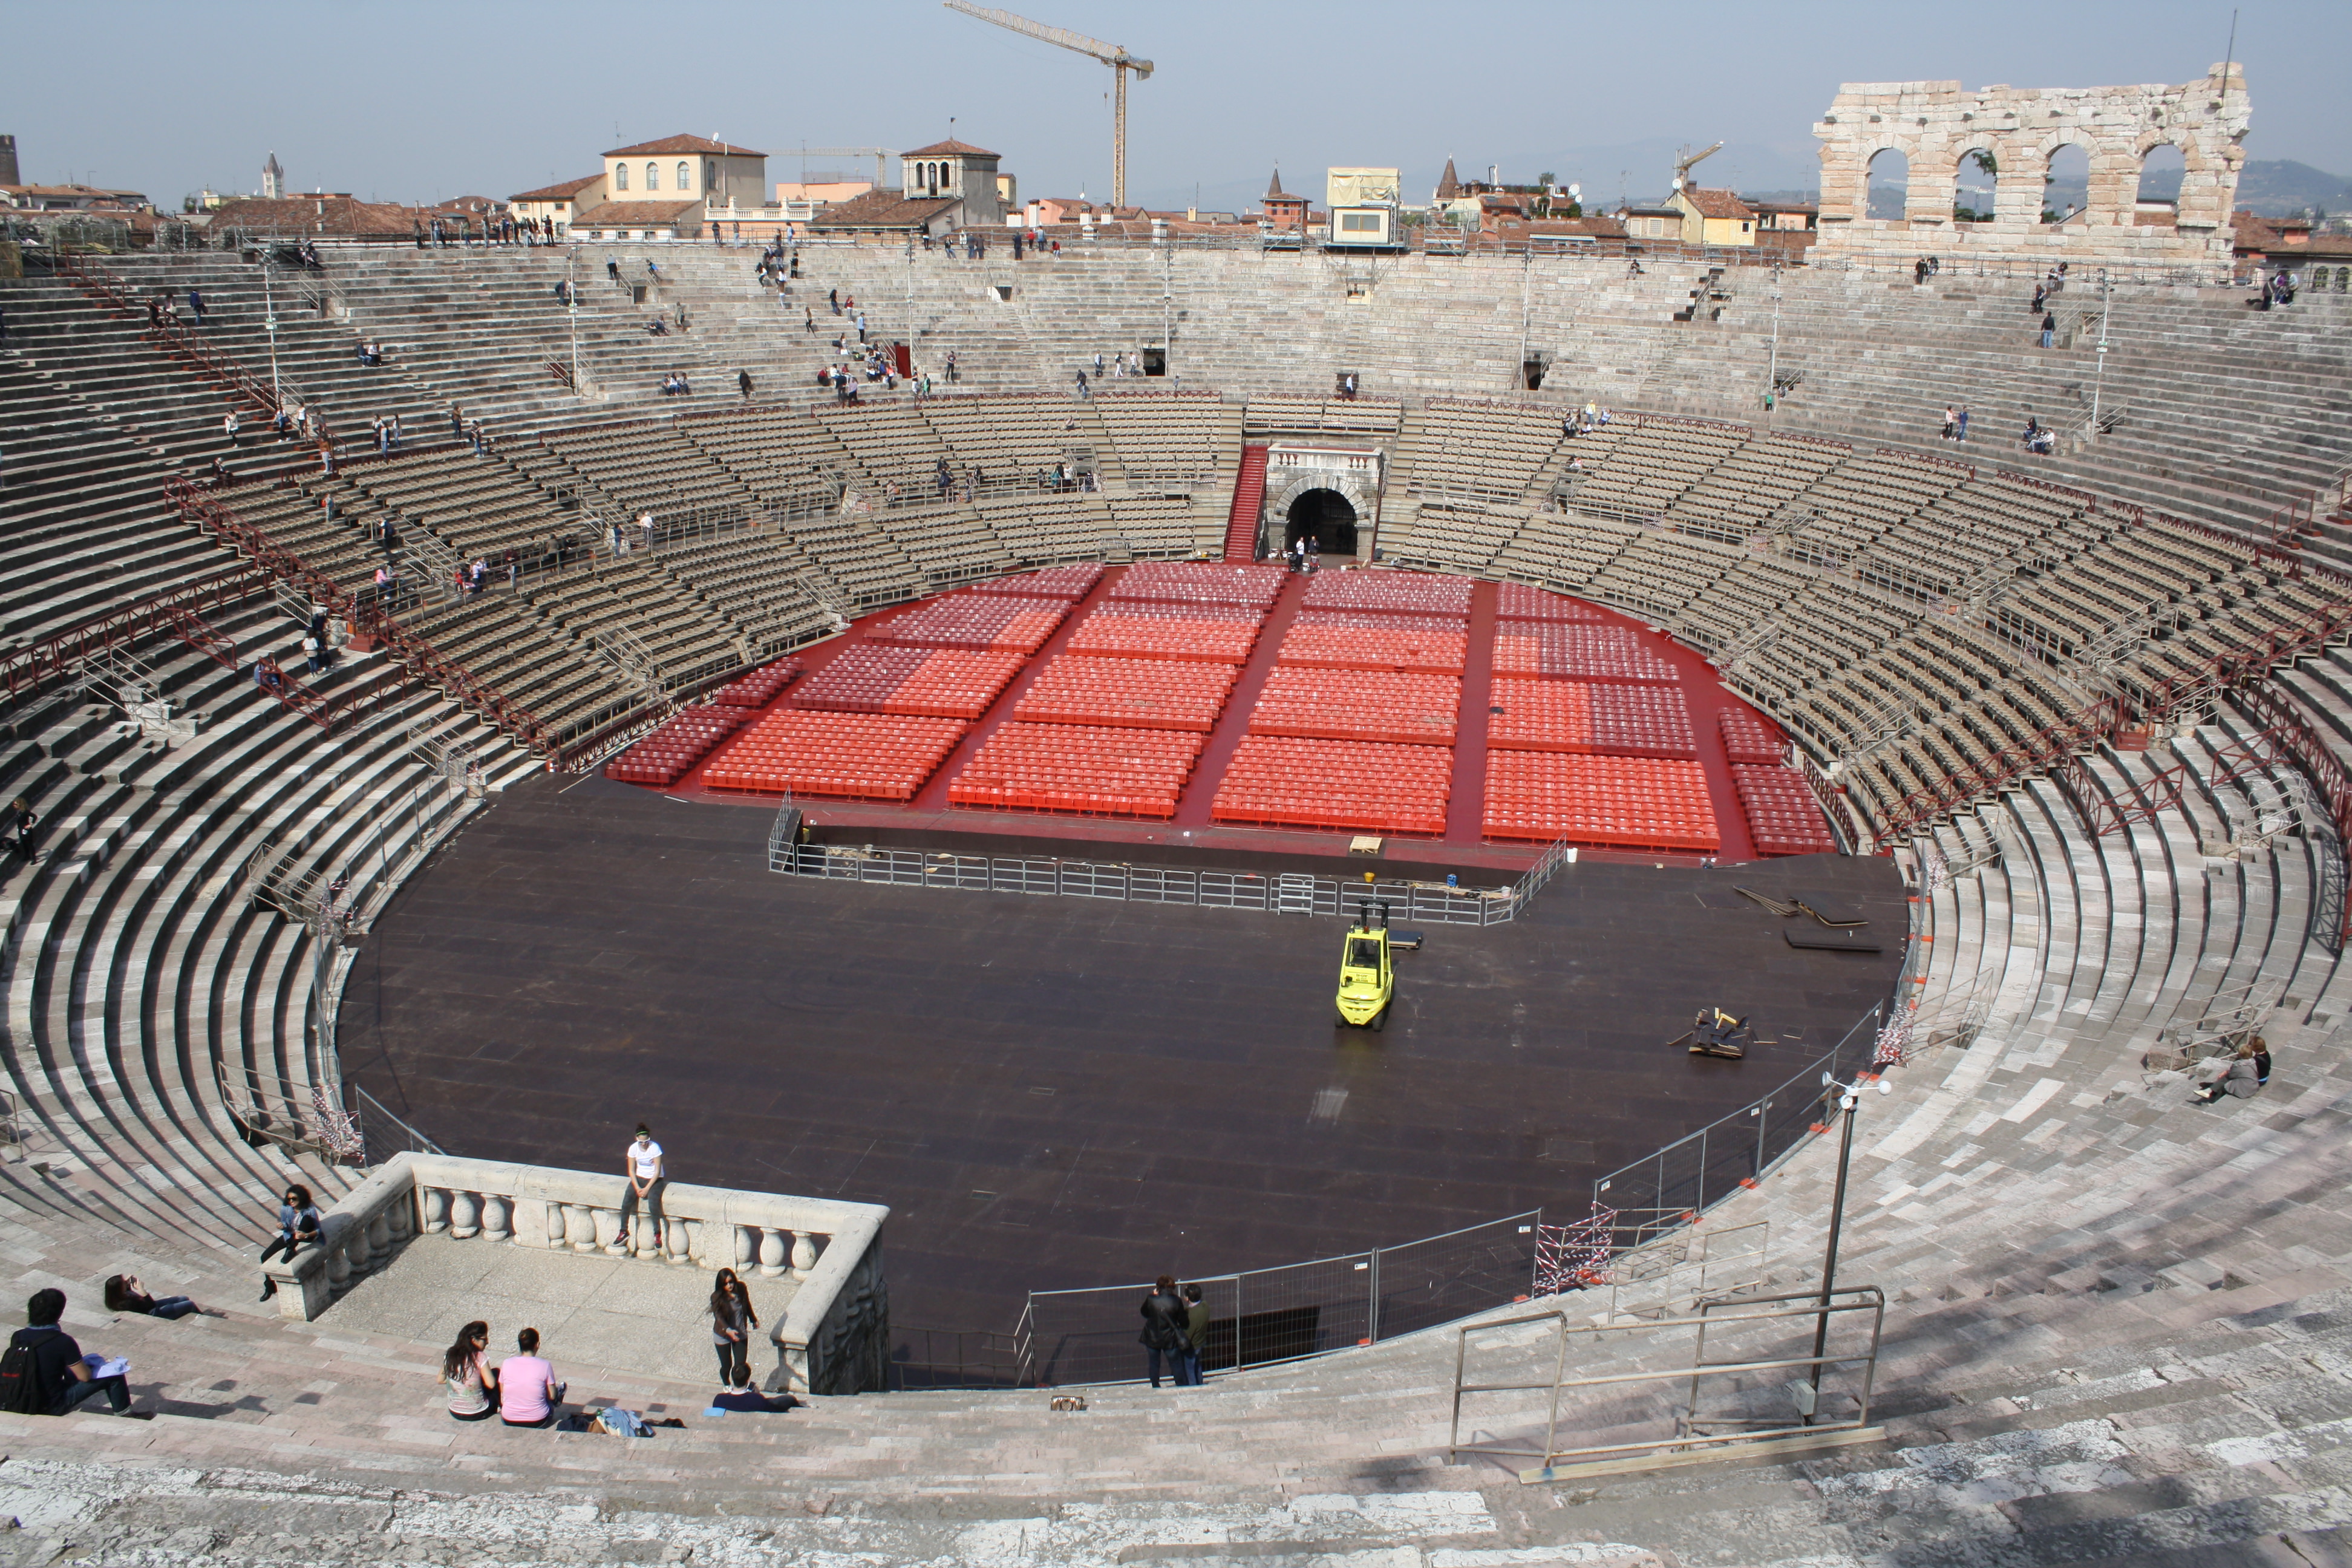 Verona: the Arena at the Gladiators' time